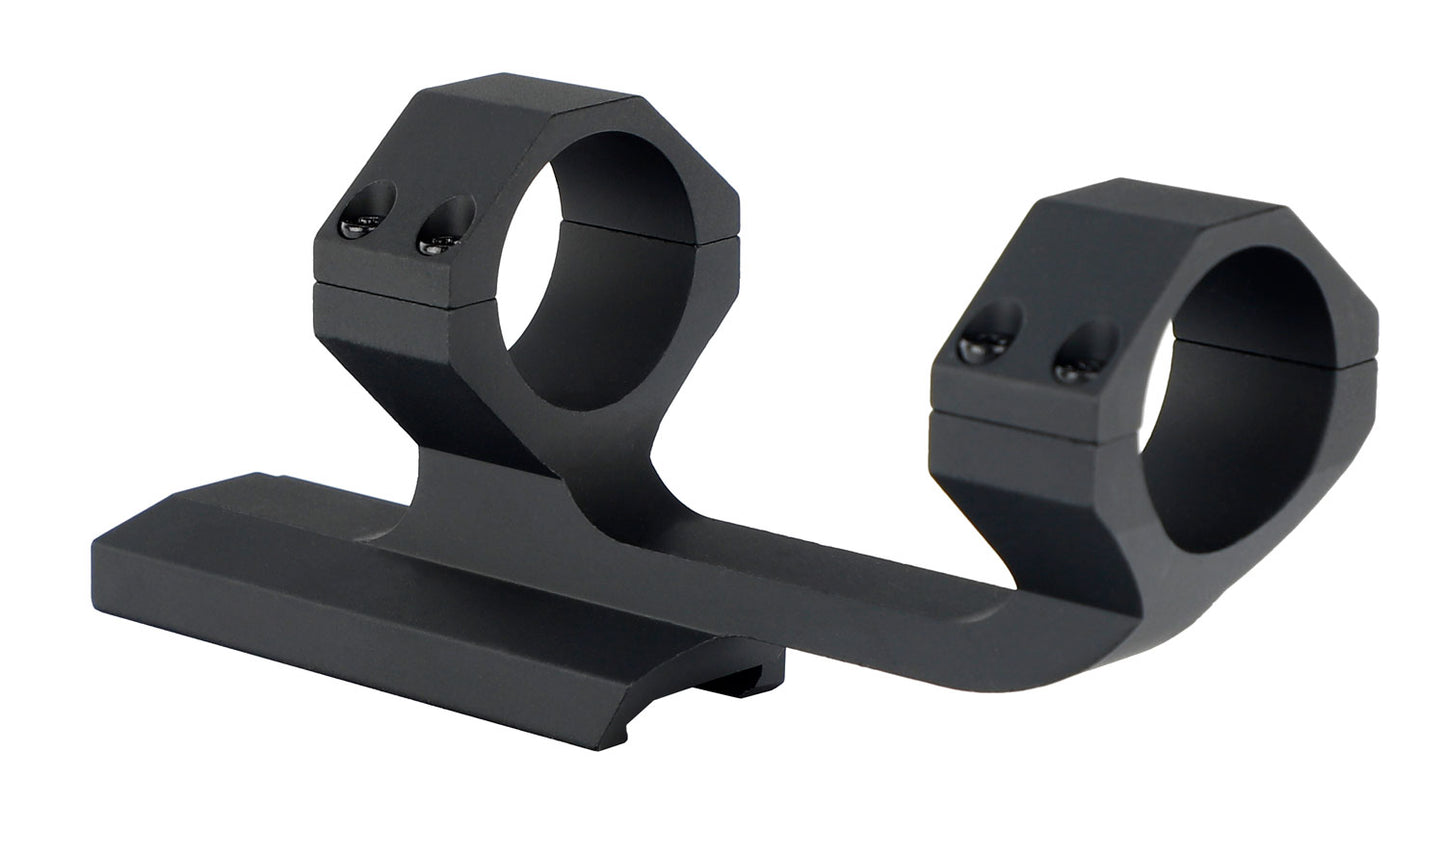 ohhunt 30mm Picatinny Cantilever Mounts with Square Integral Recoil Stops for Rifle Scope